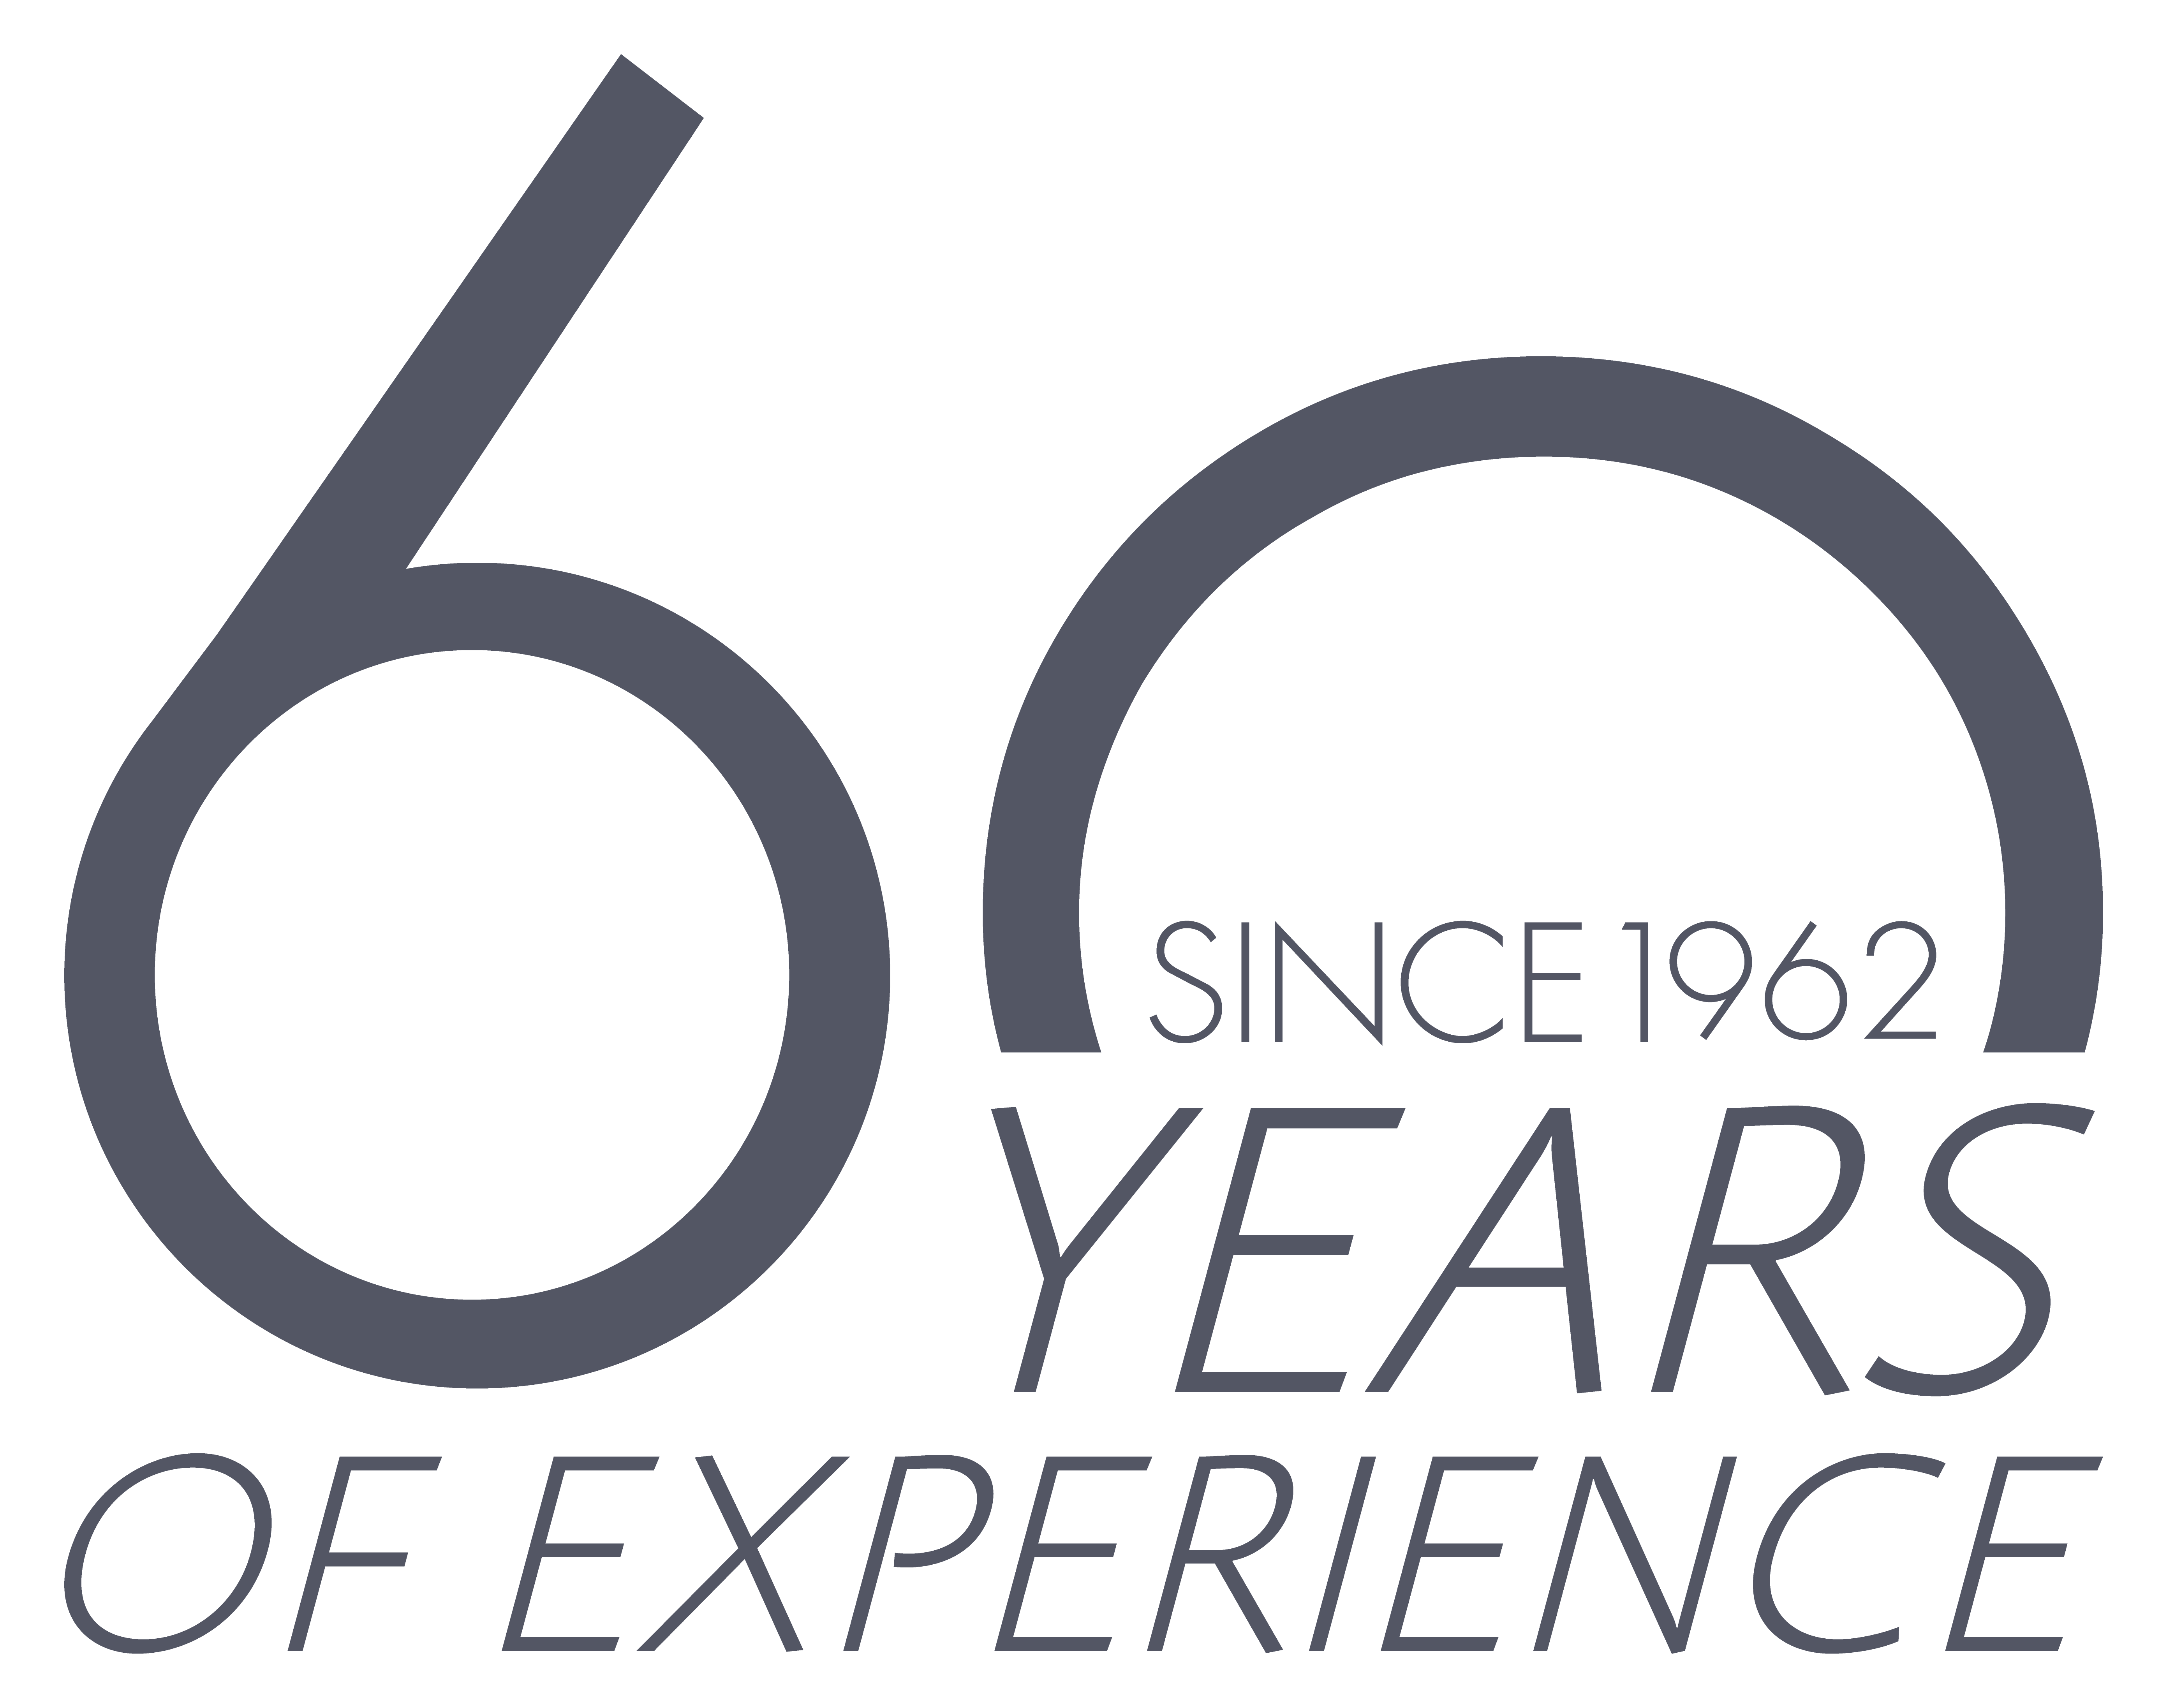 50 Years of experience